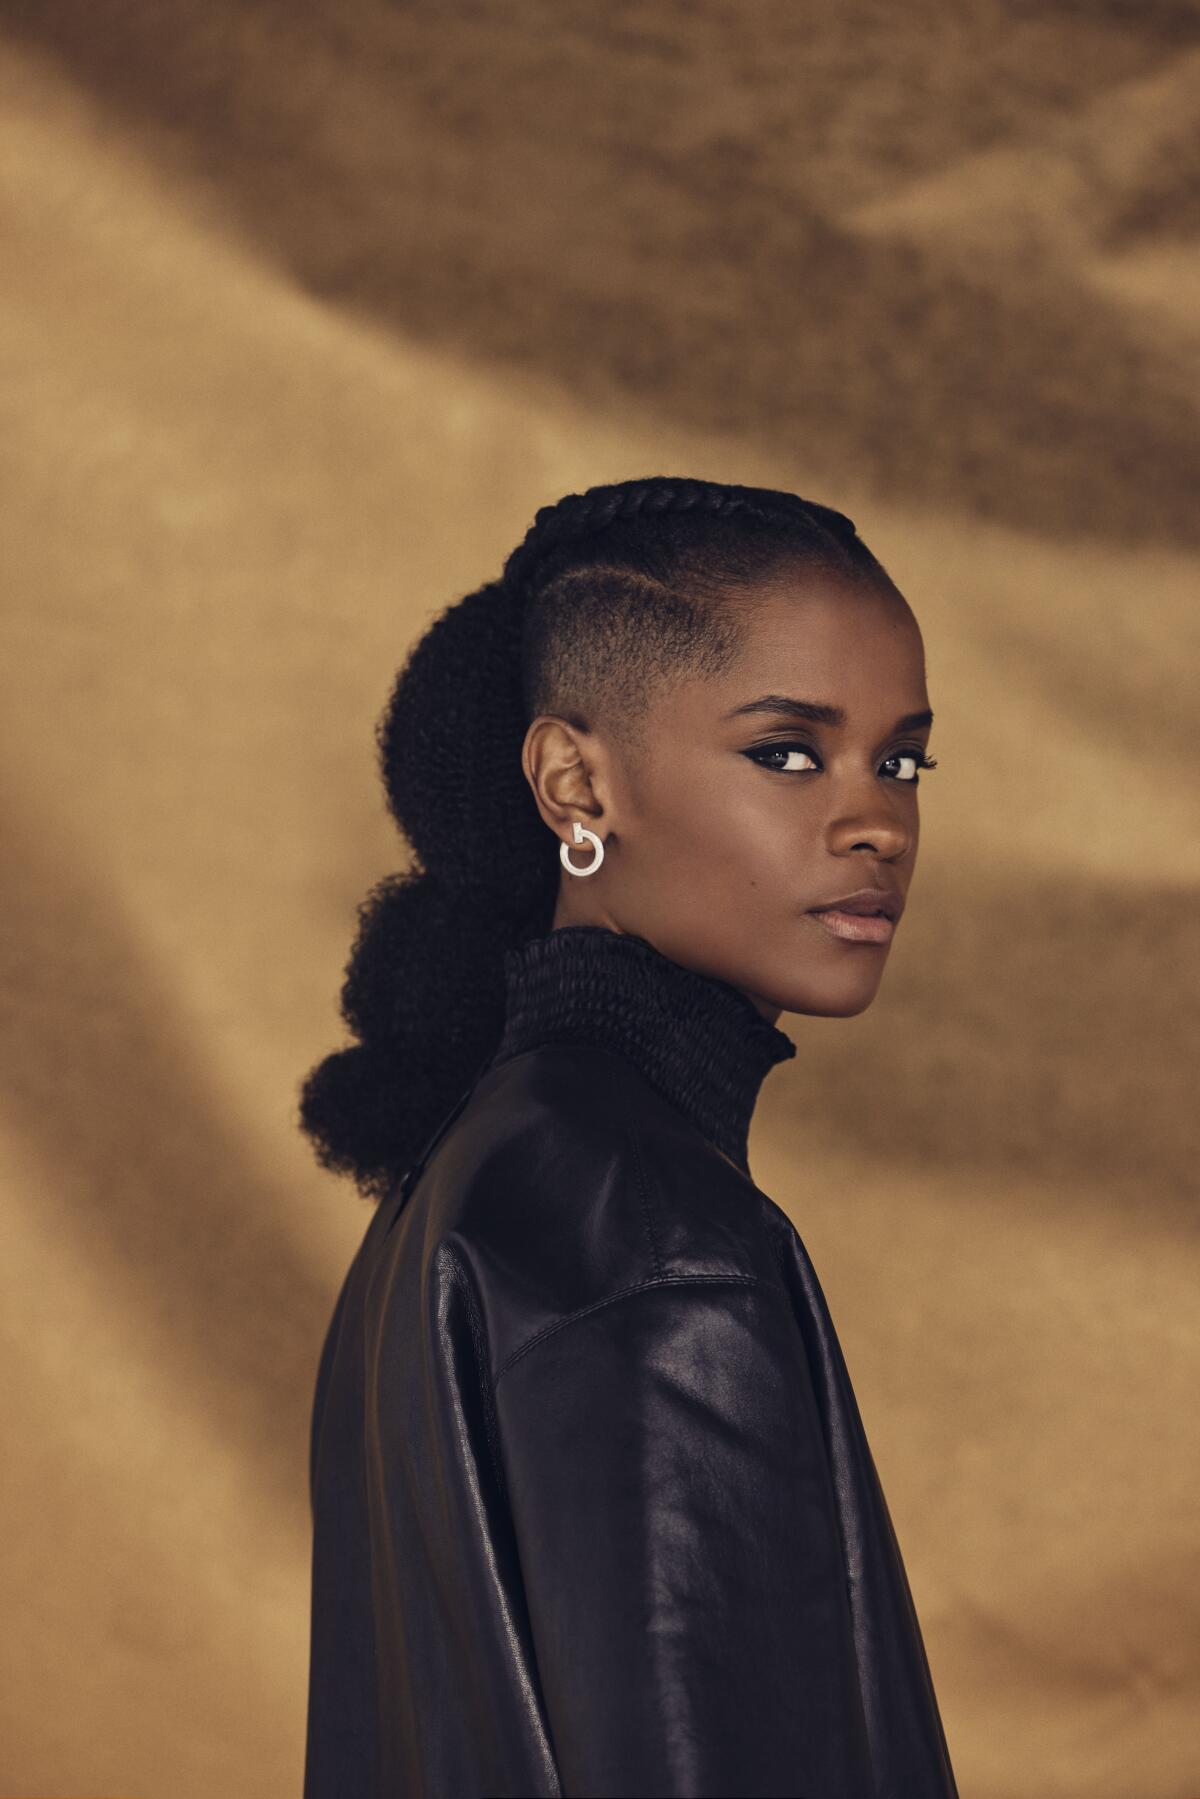 Letitia Wright wears a high-necked black top for a portrait.